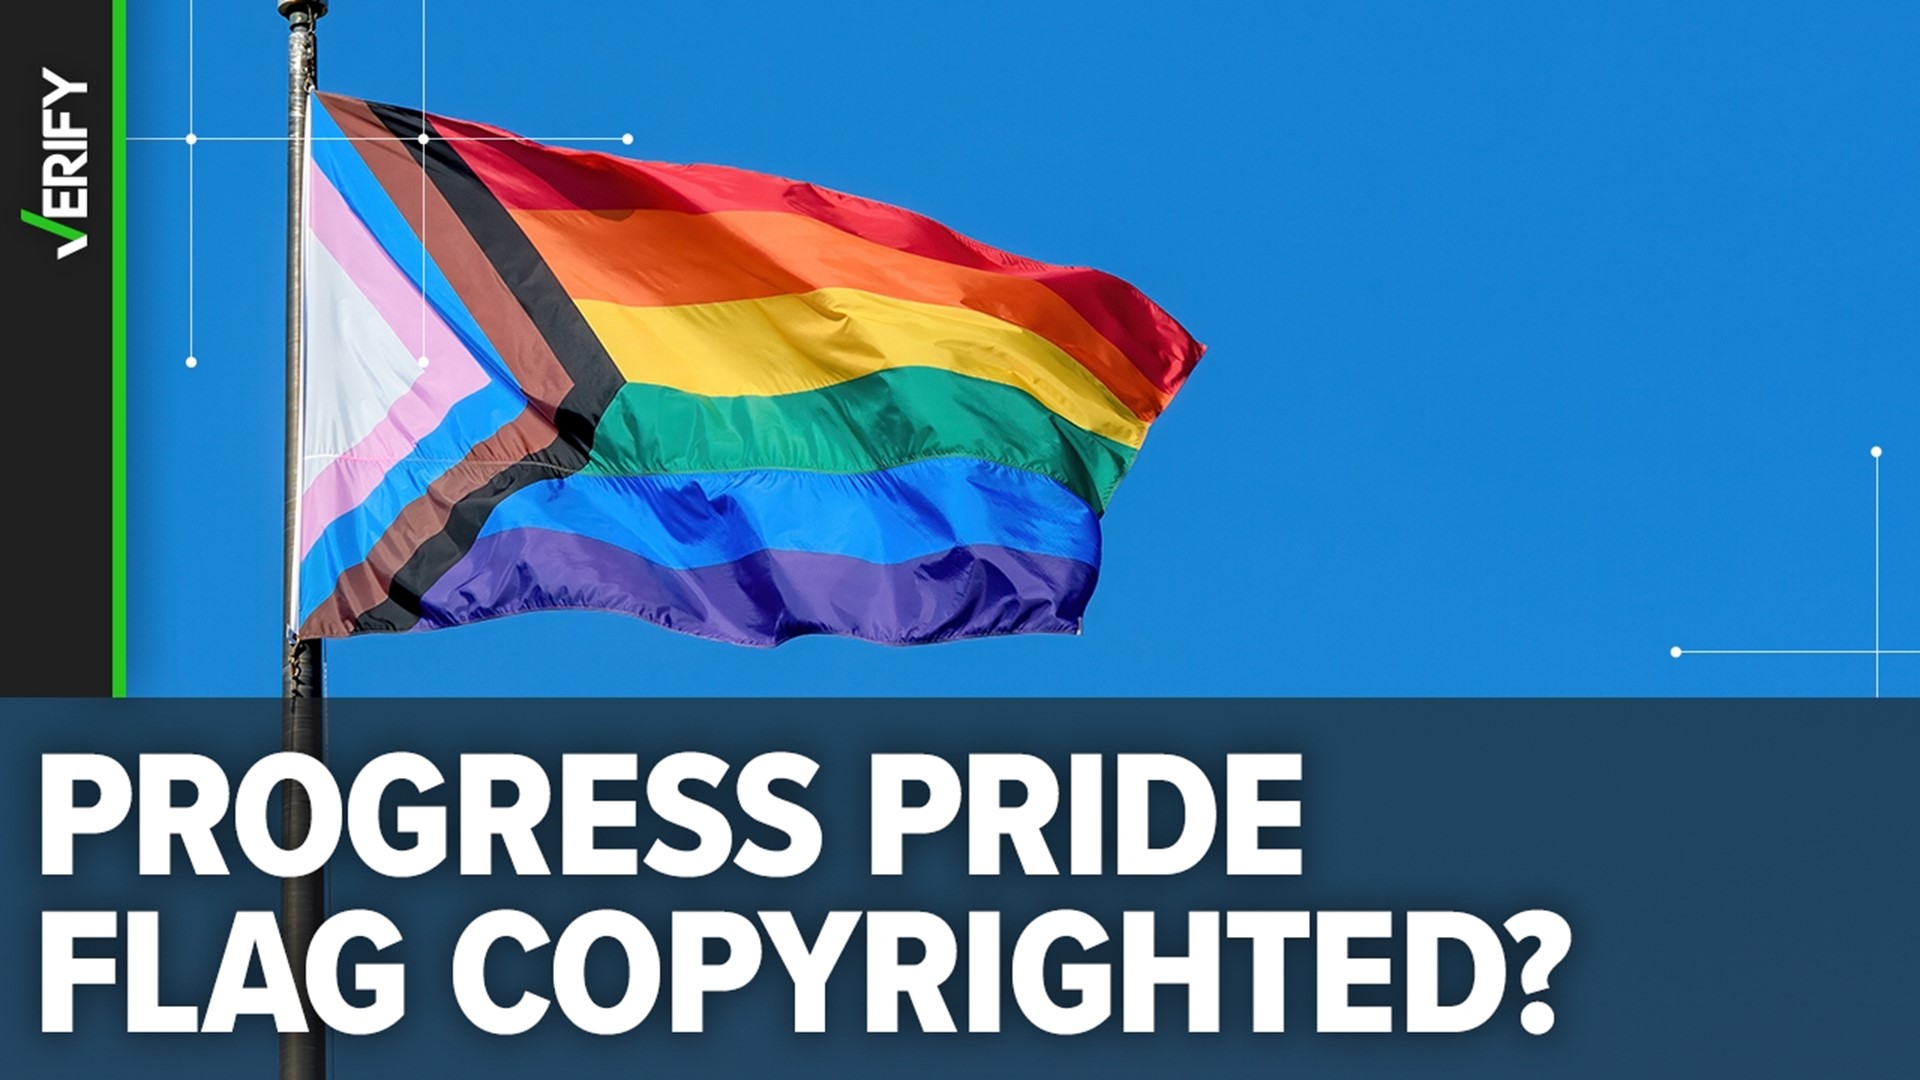 People on social media claimed the flag is copyrighted, but its Creative Commons license only restricts commercial use, which requires the designer’s permission.